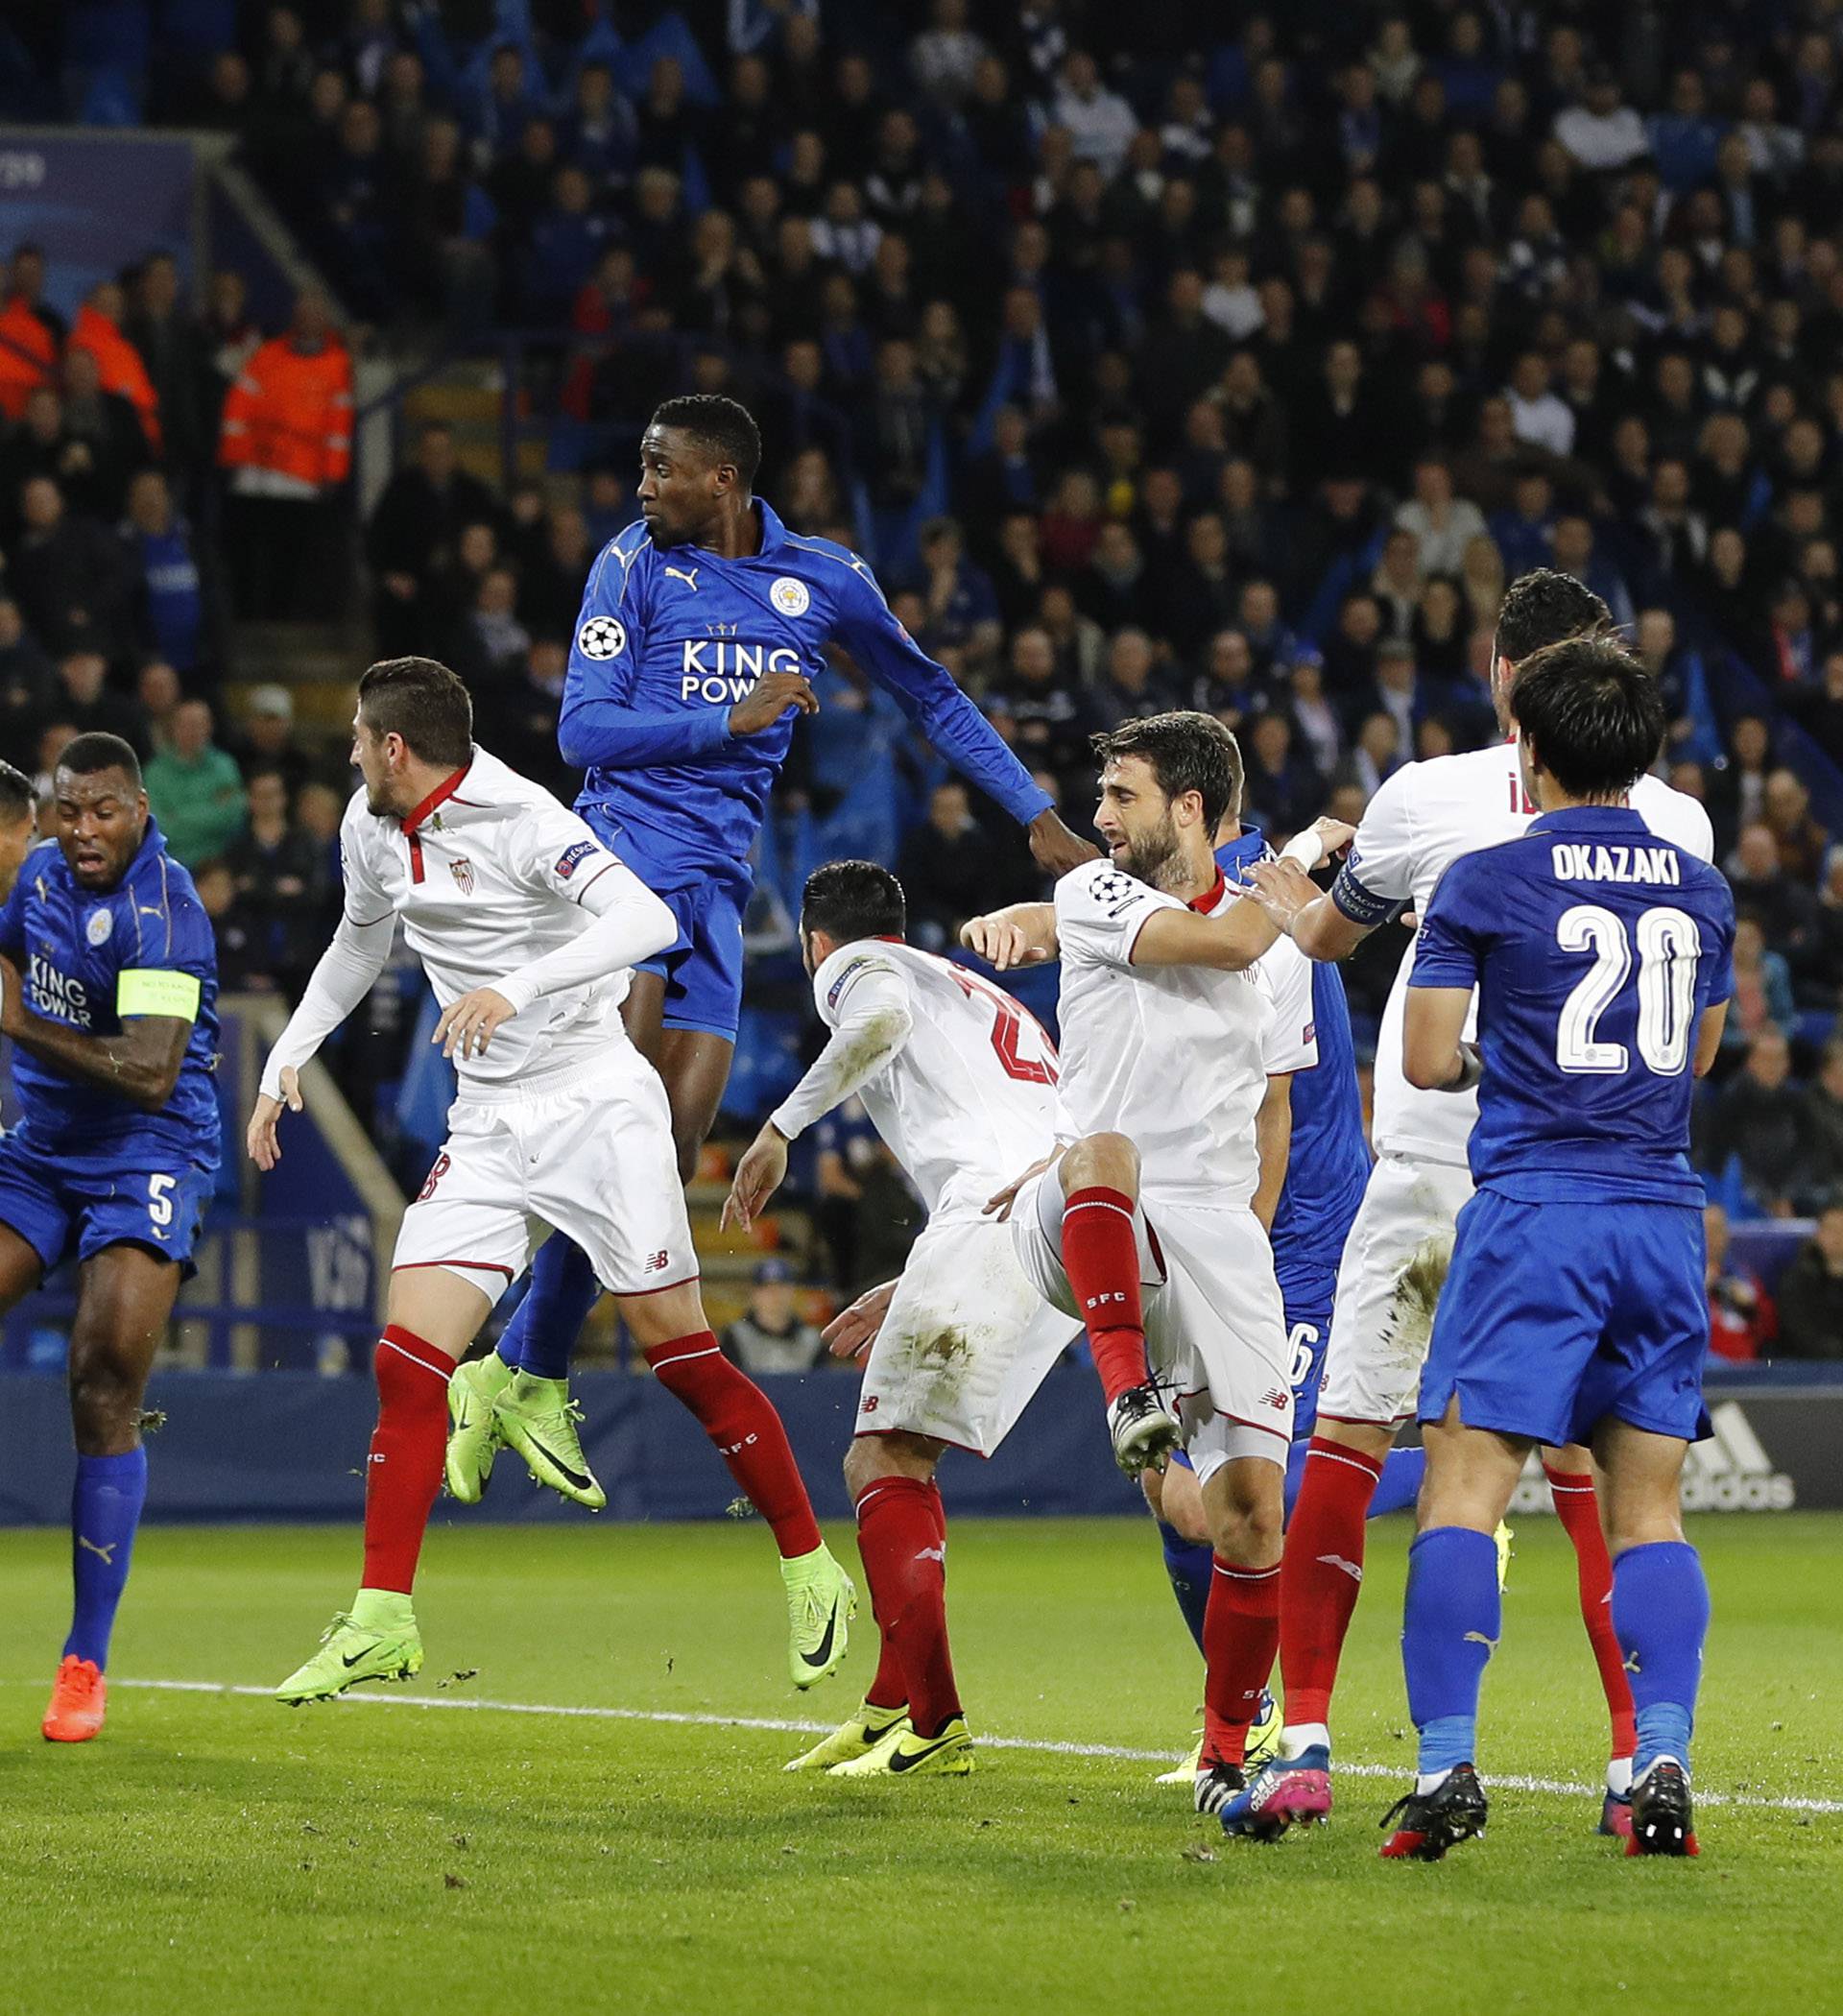 Leicester City's Wes Morgan scores their first goal